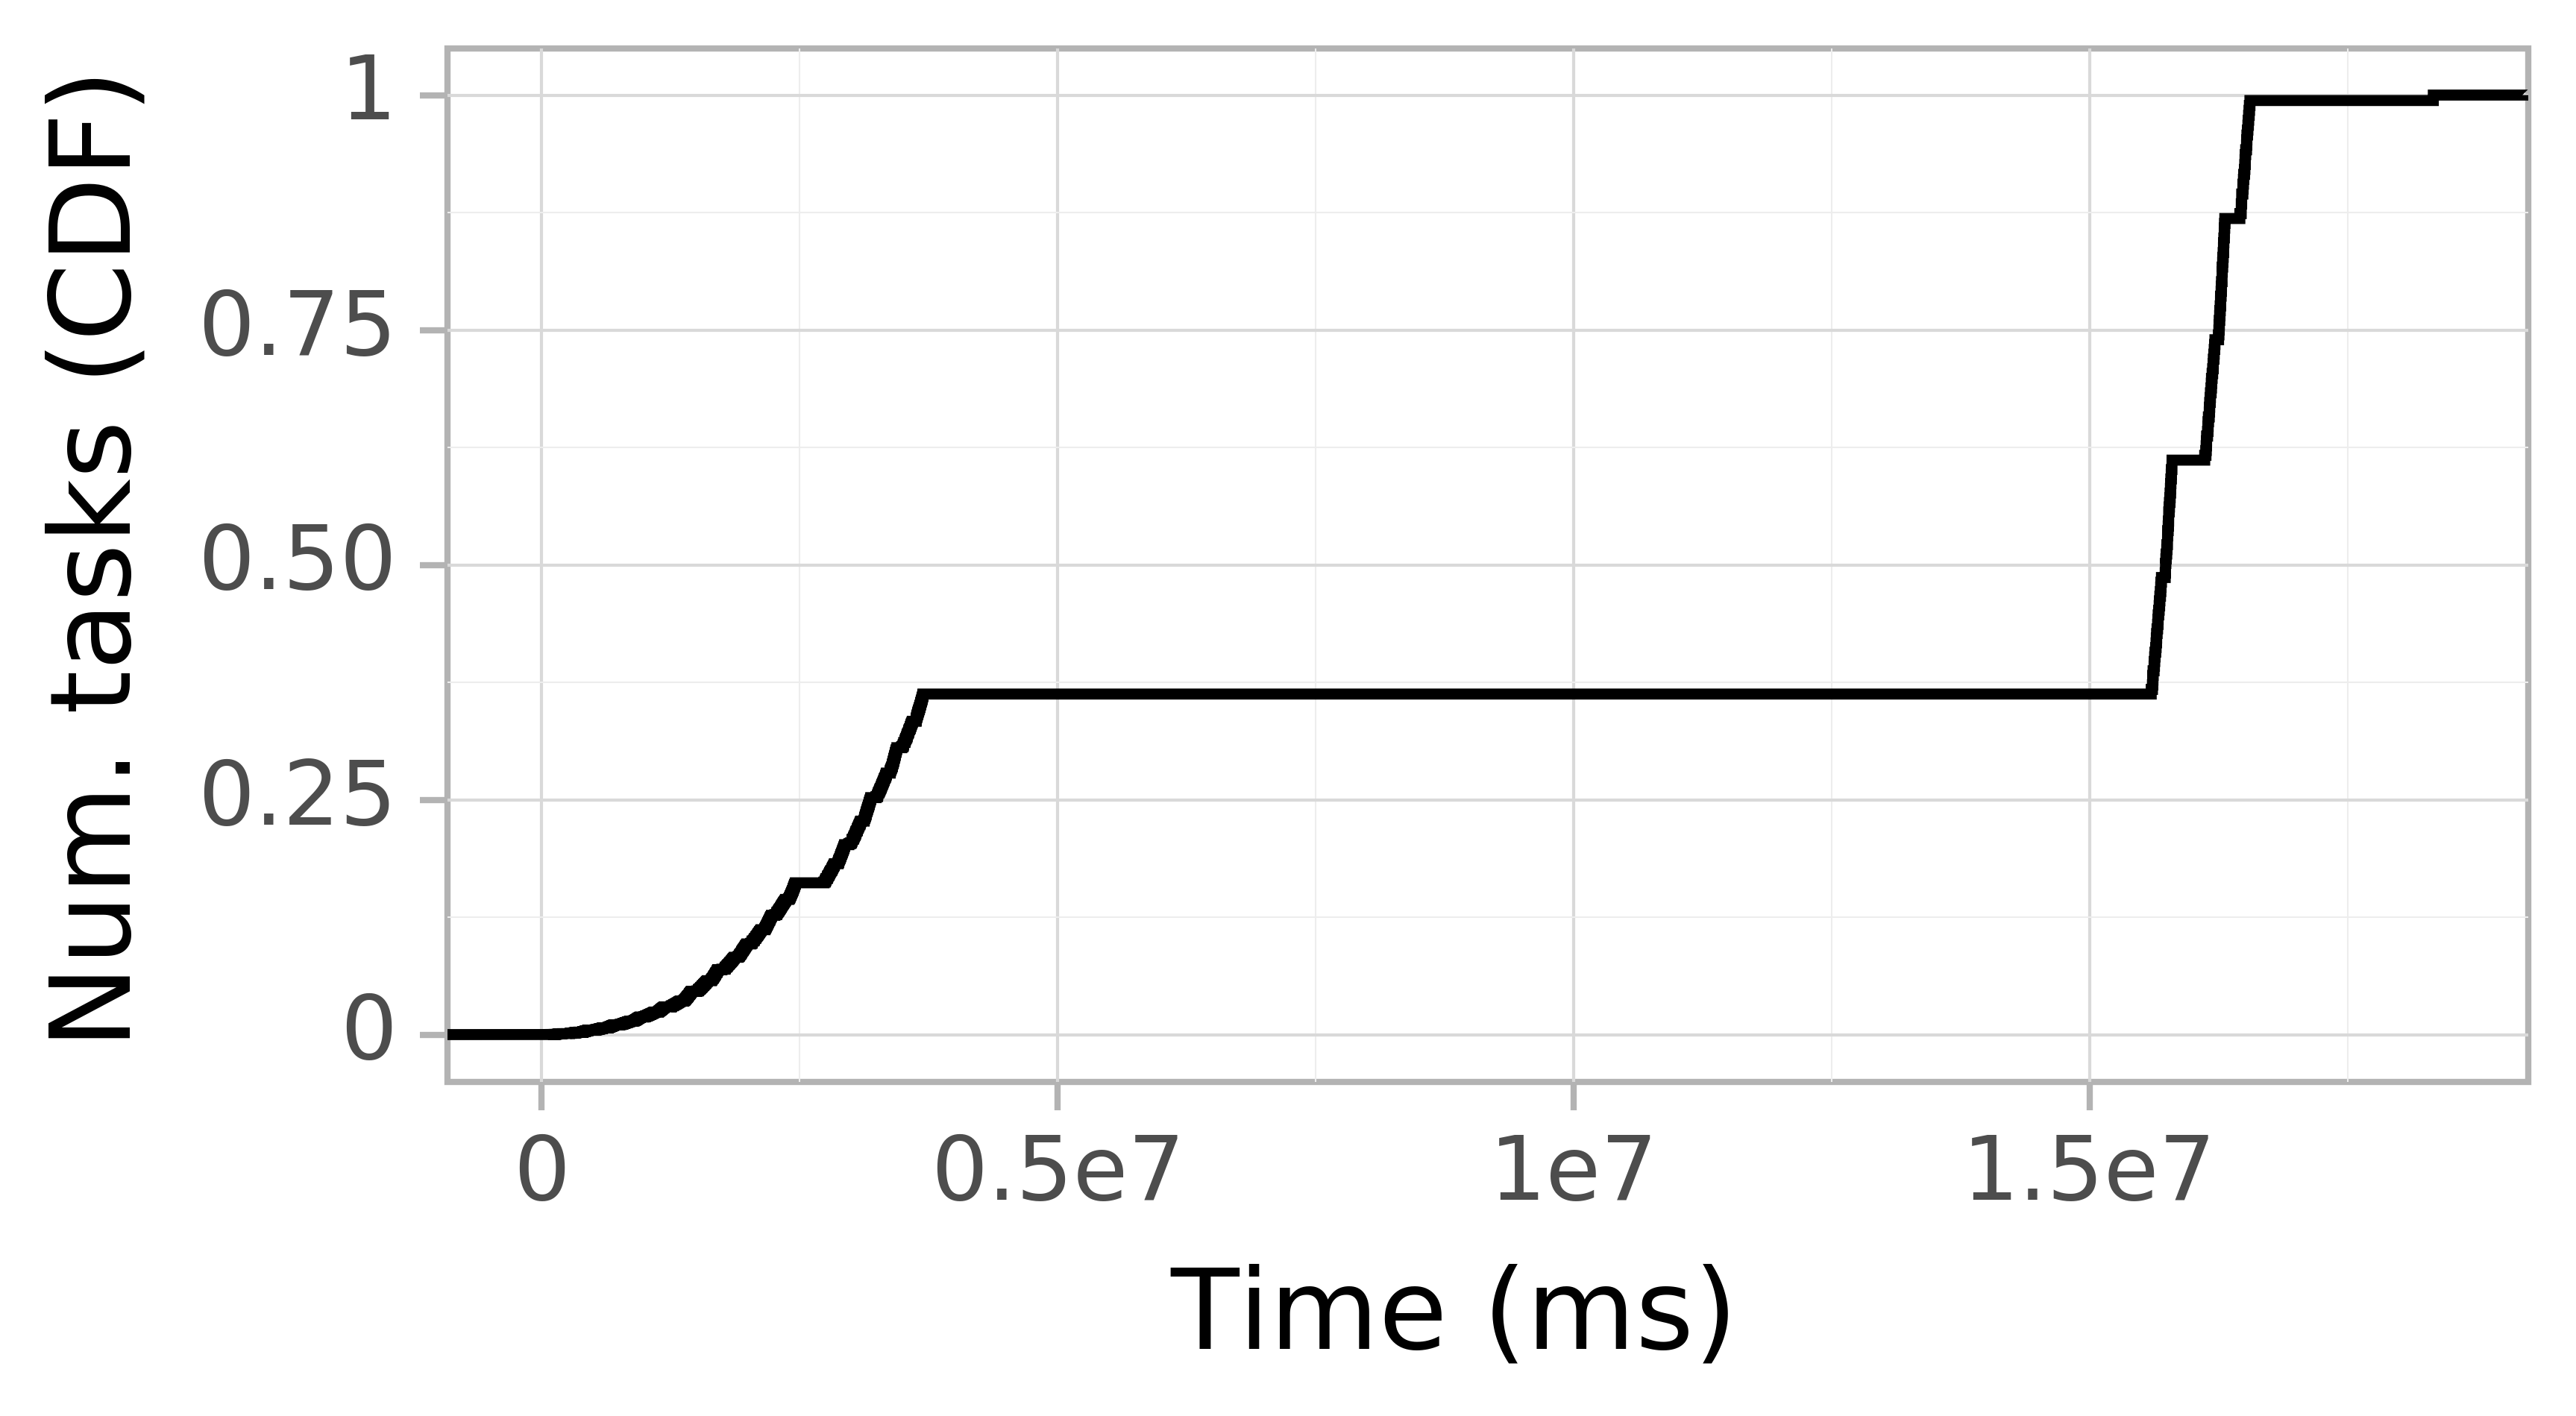 Task arrival CDF graph for the askalon-new_ee21 trace.